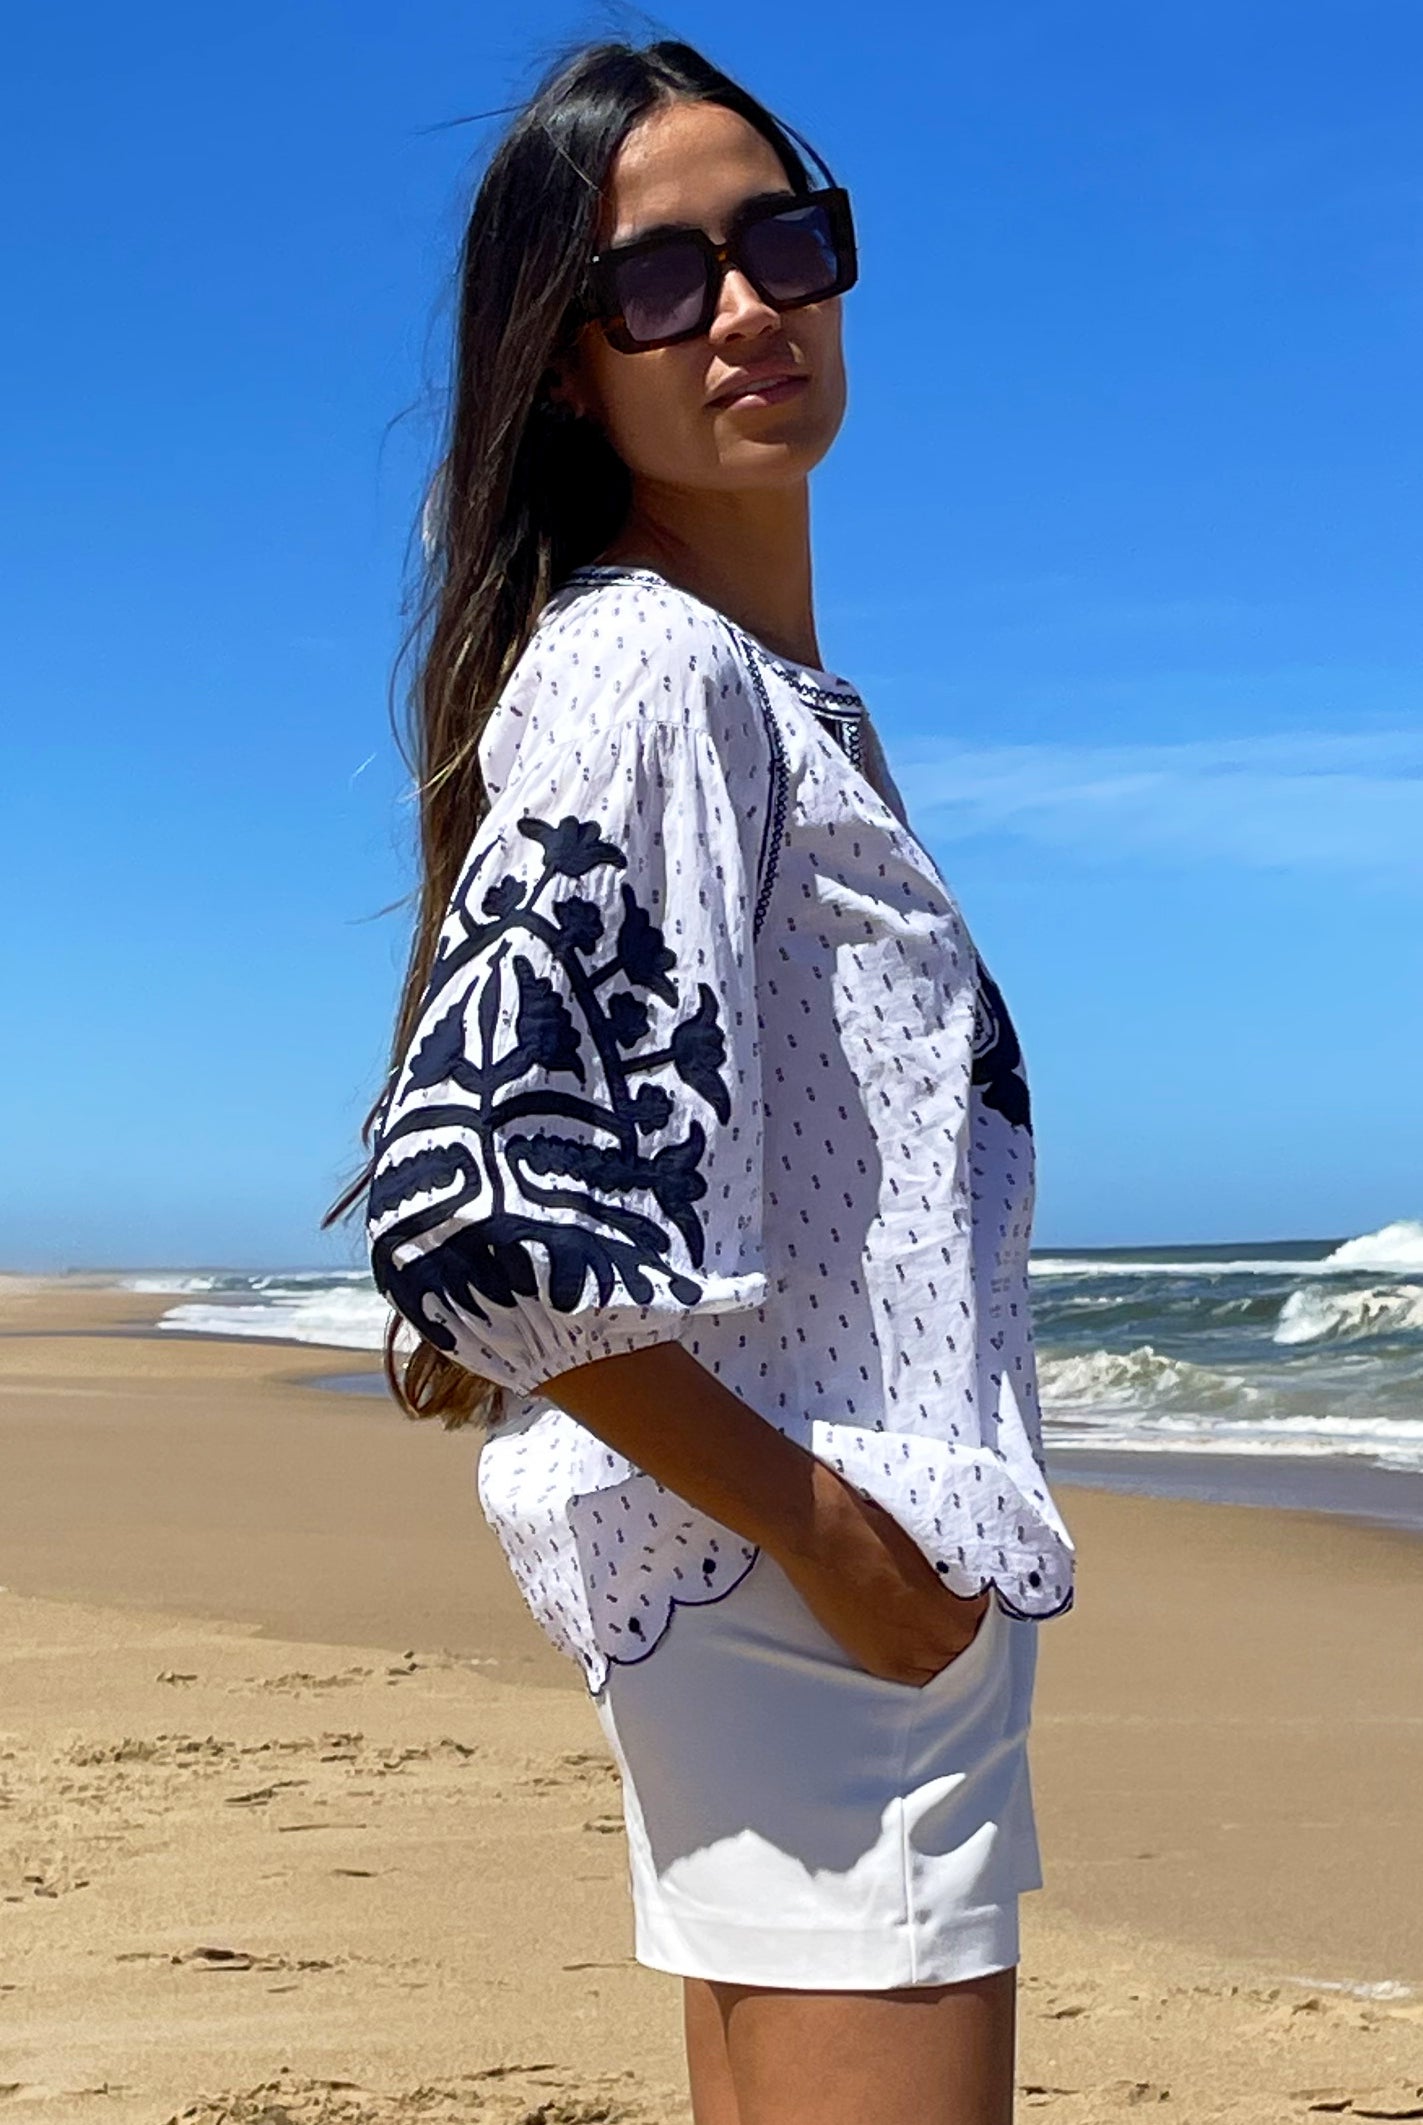 A model stood on a beach wearing a Rose and Rose cotton dobby Ferrara top, white shorts and sunglasses.